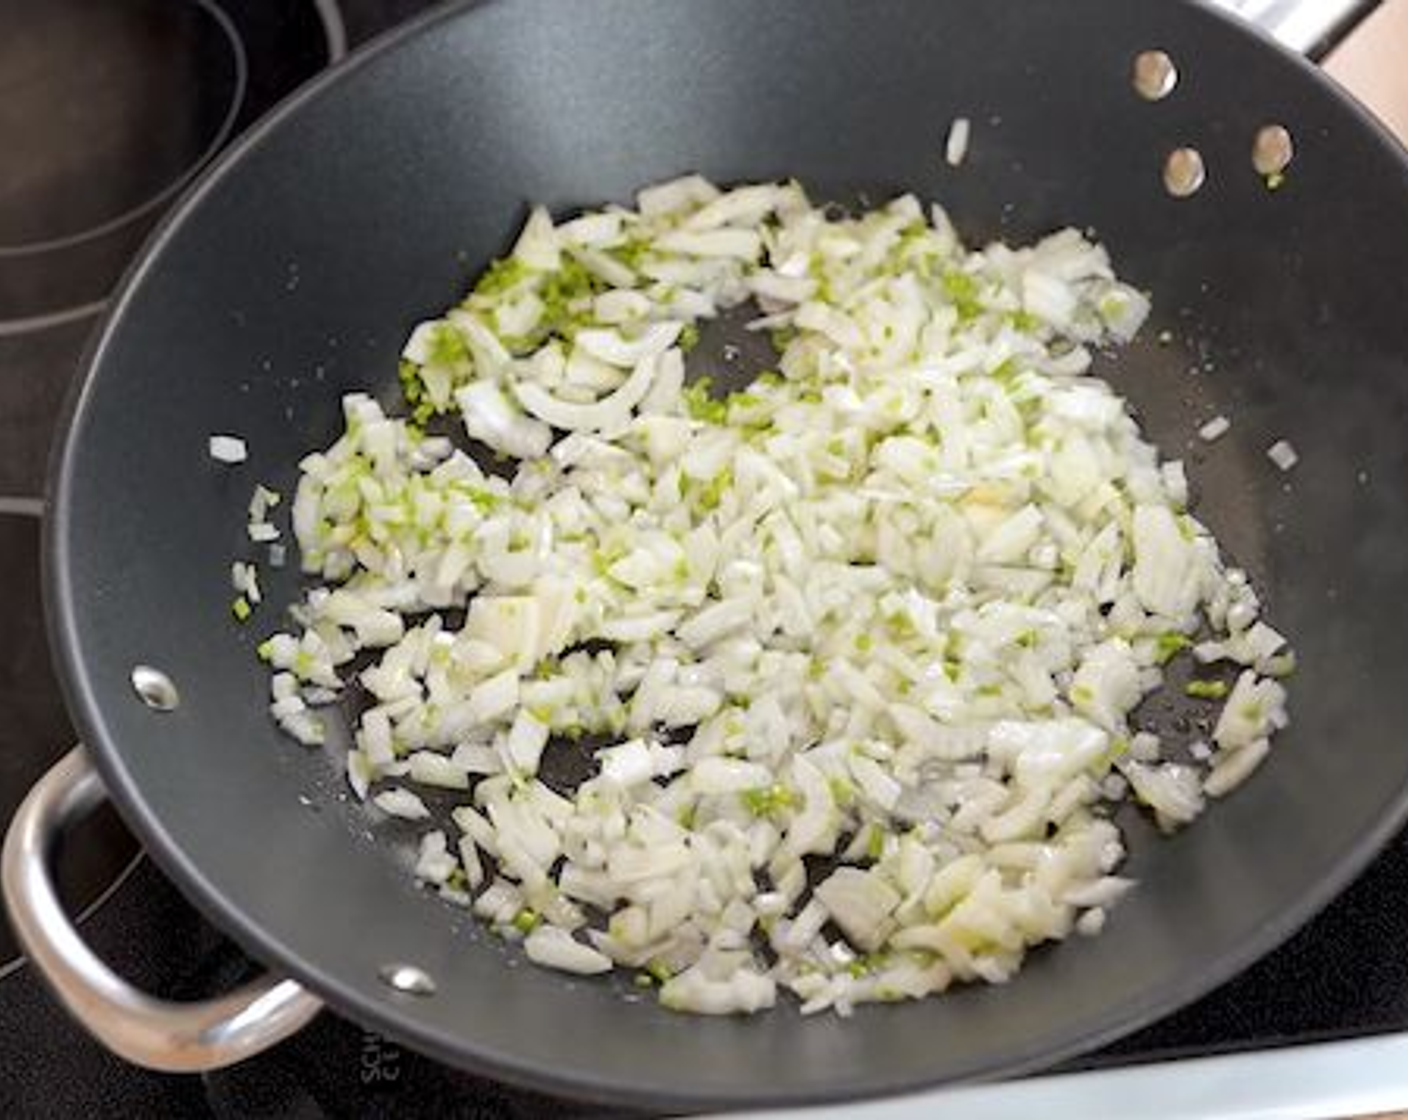 step 8 In a large pan add Sunflower Oil (1 1/2 Tbsp), White Onion (1), diced cilantro stems and season with Salt (1 tsp). Stir and cook for about 4 minutes.